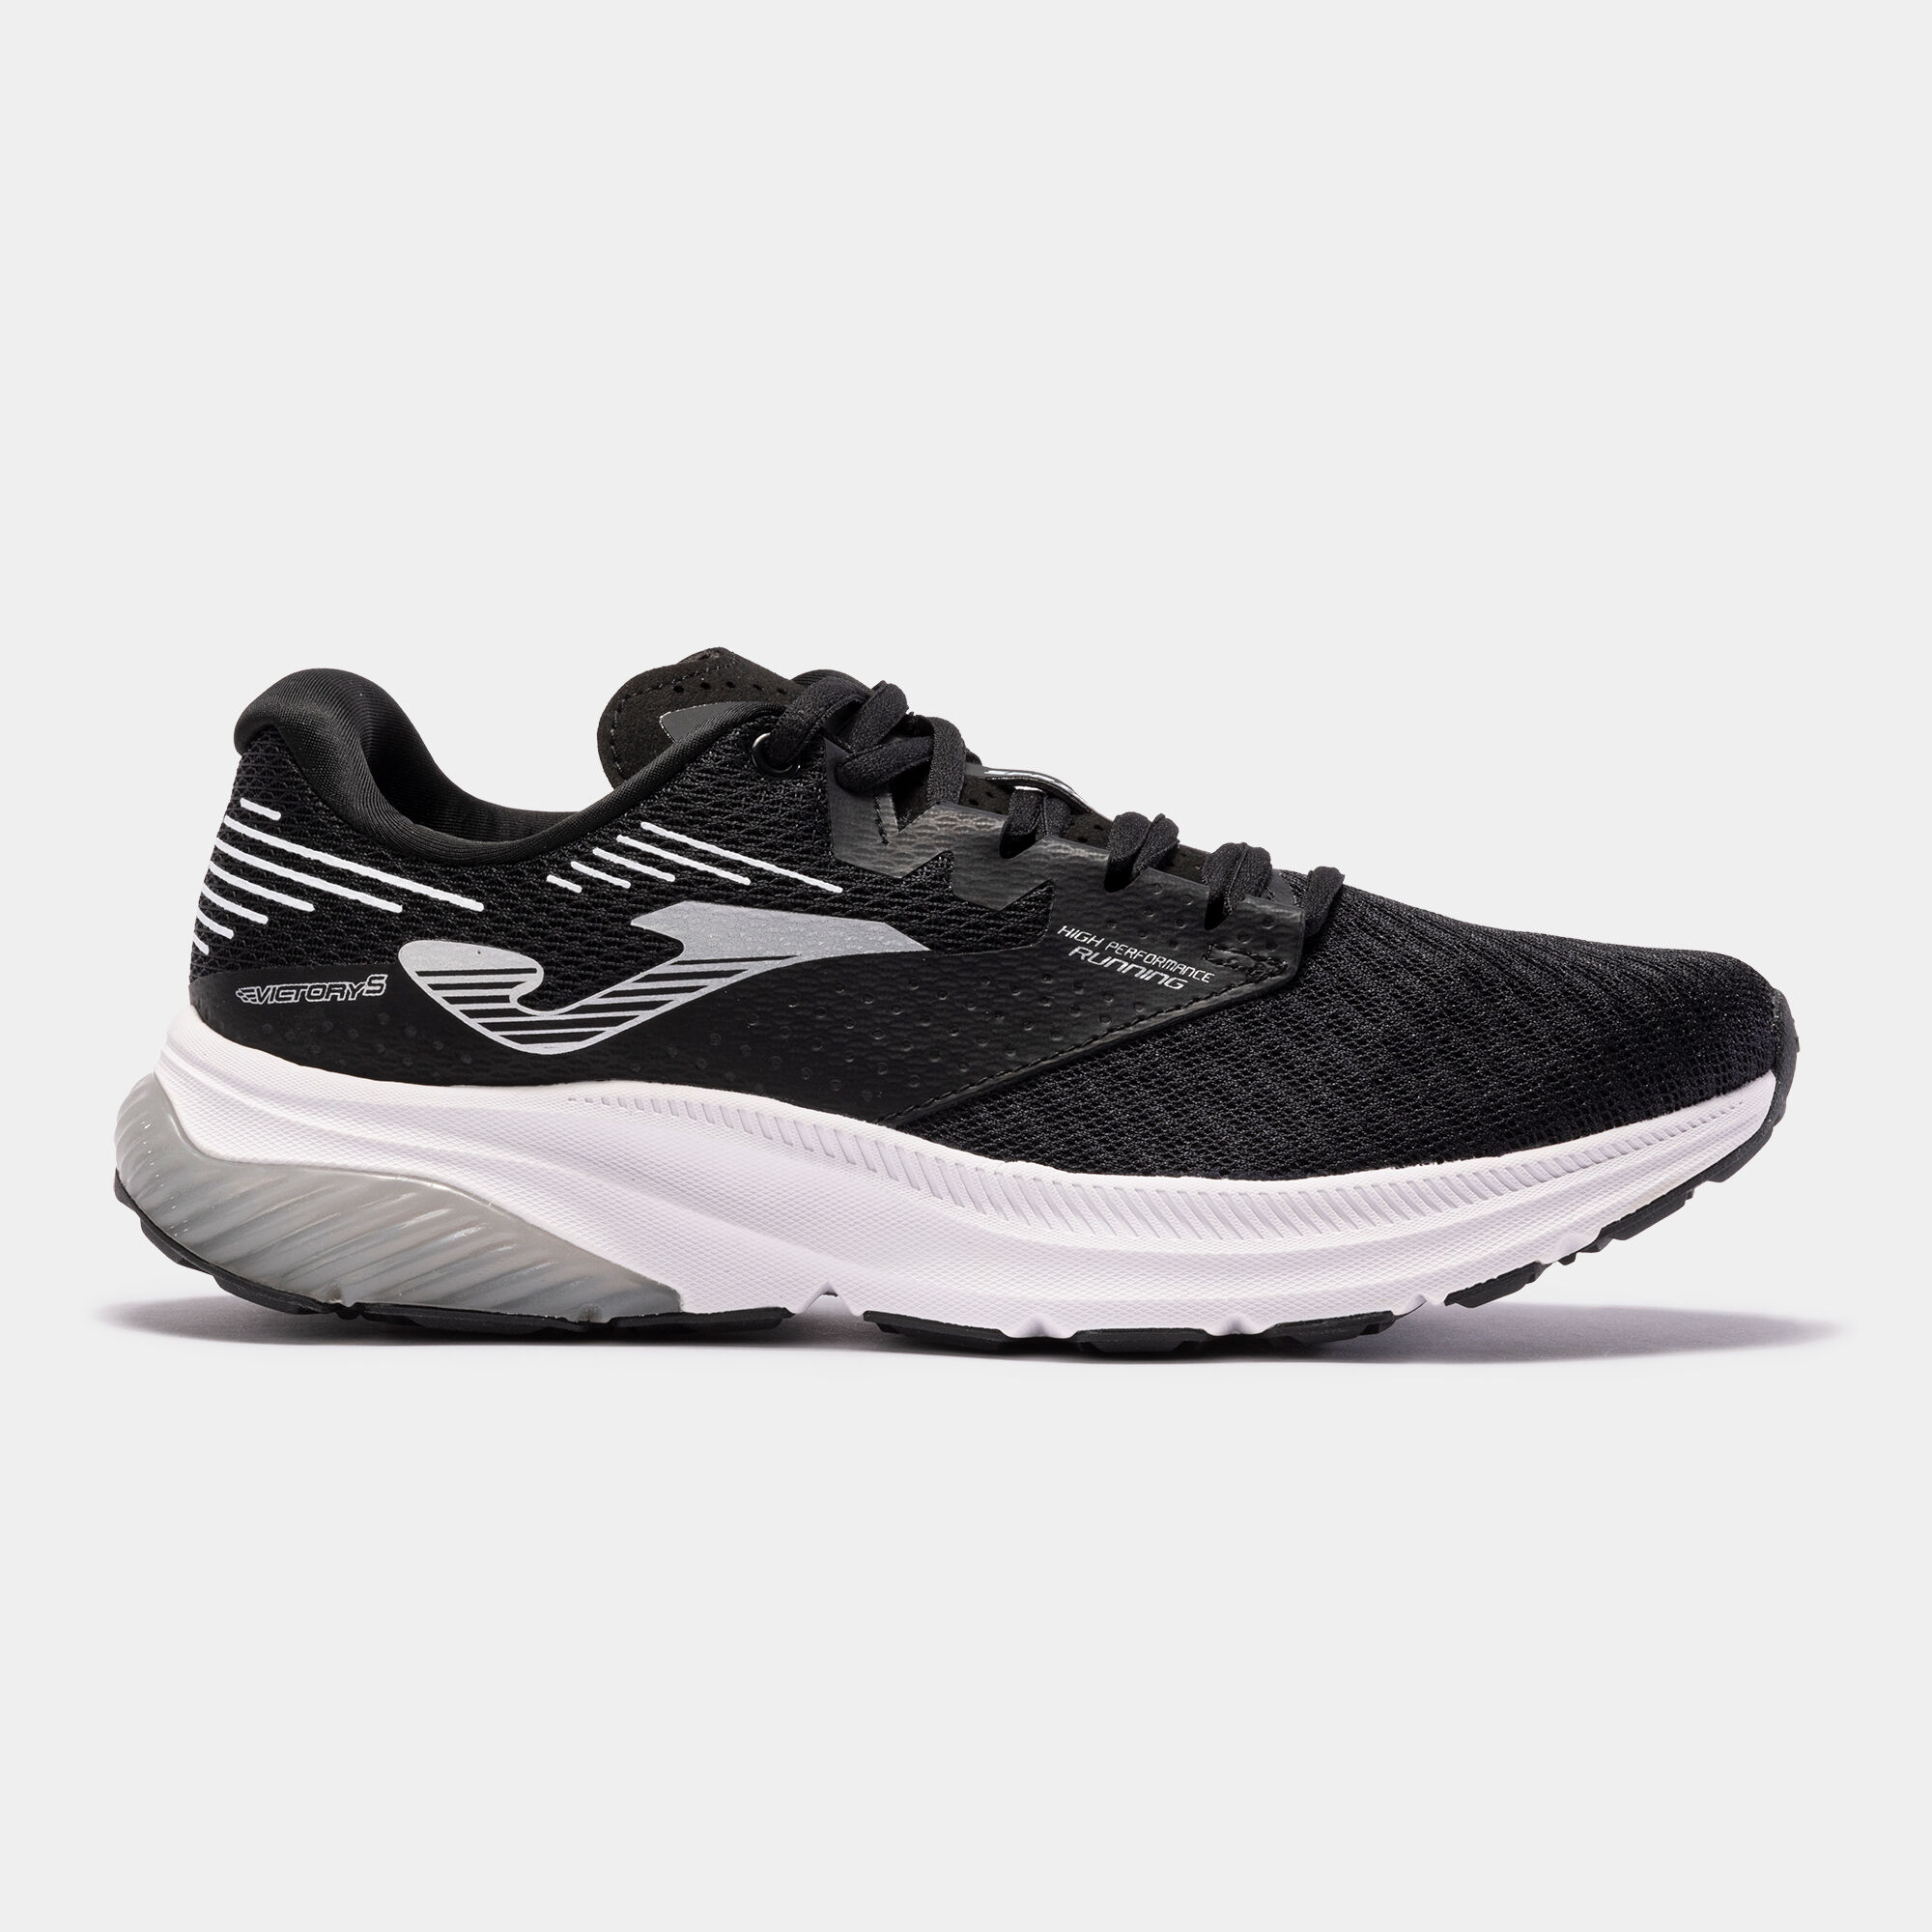 Chaussures running Victory 22 homme noir